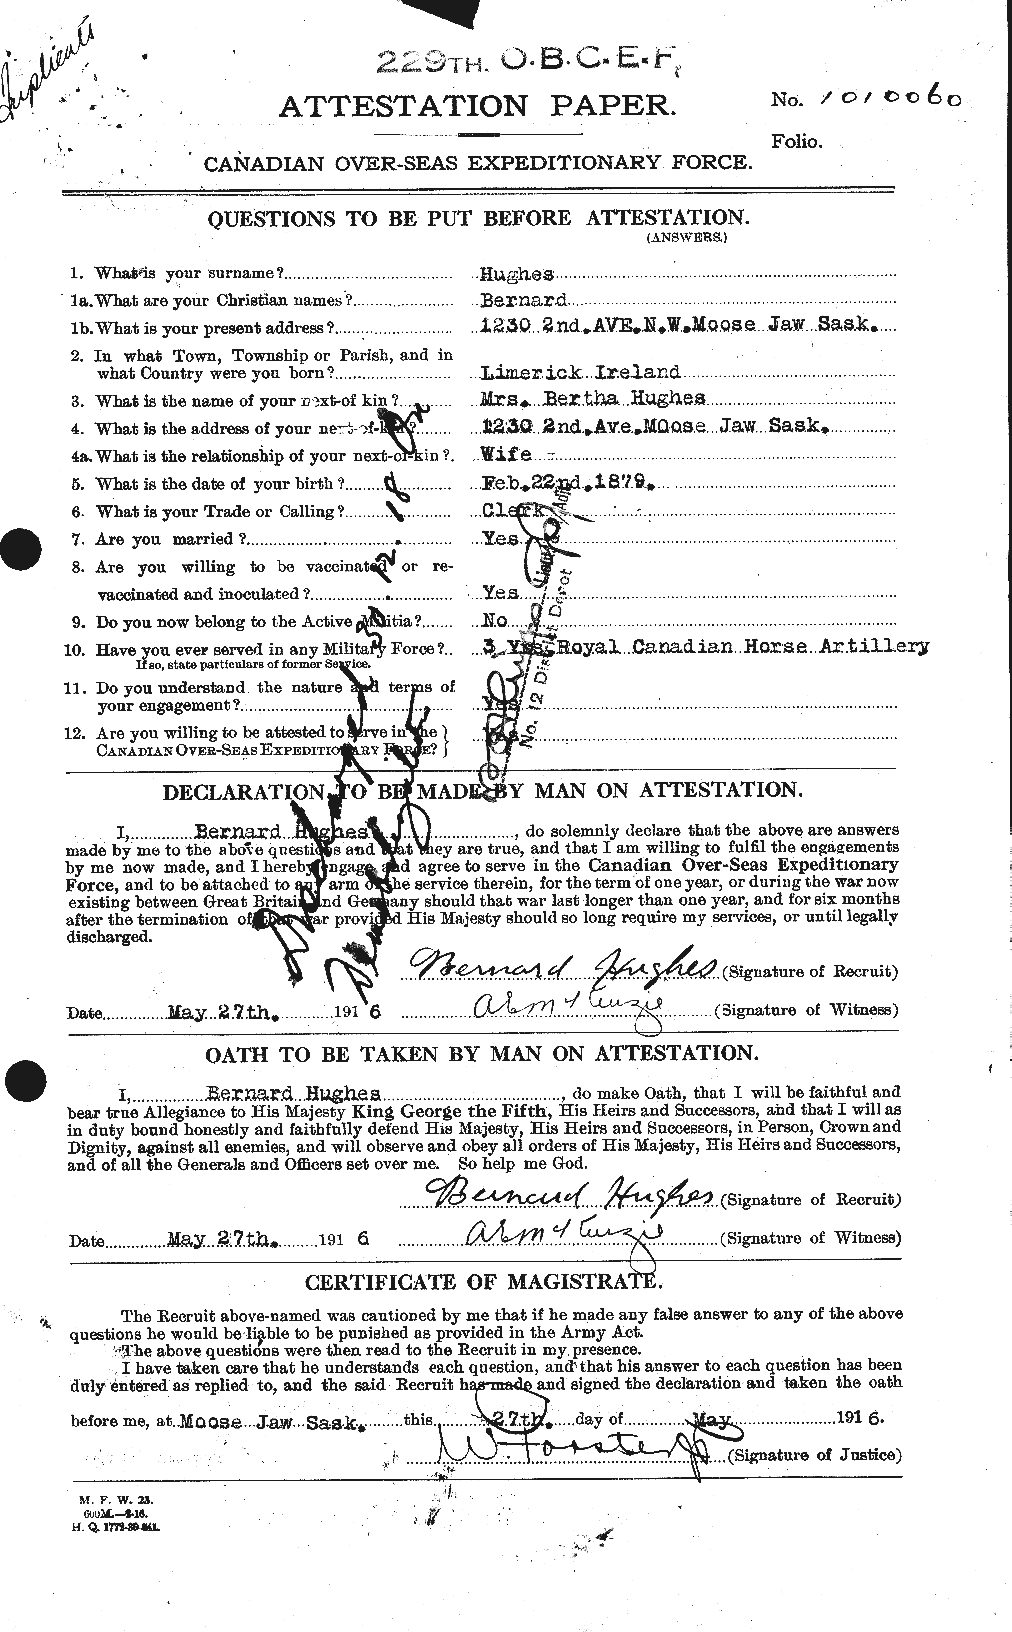 Personnel Records of the First World War - CEF 402583a